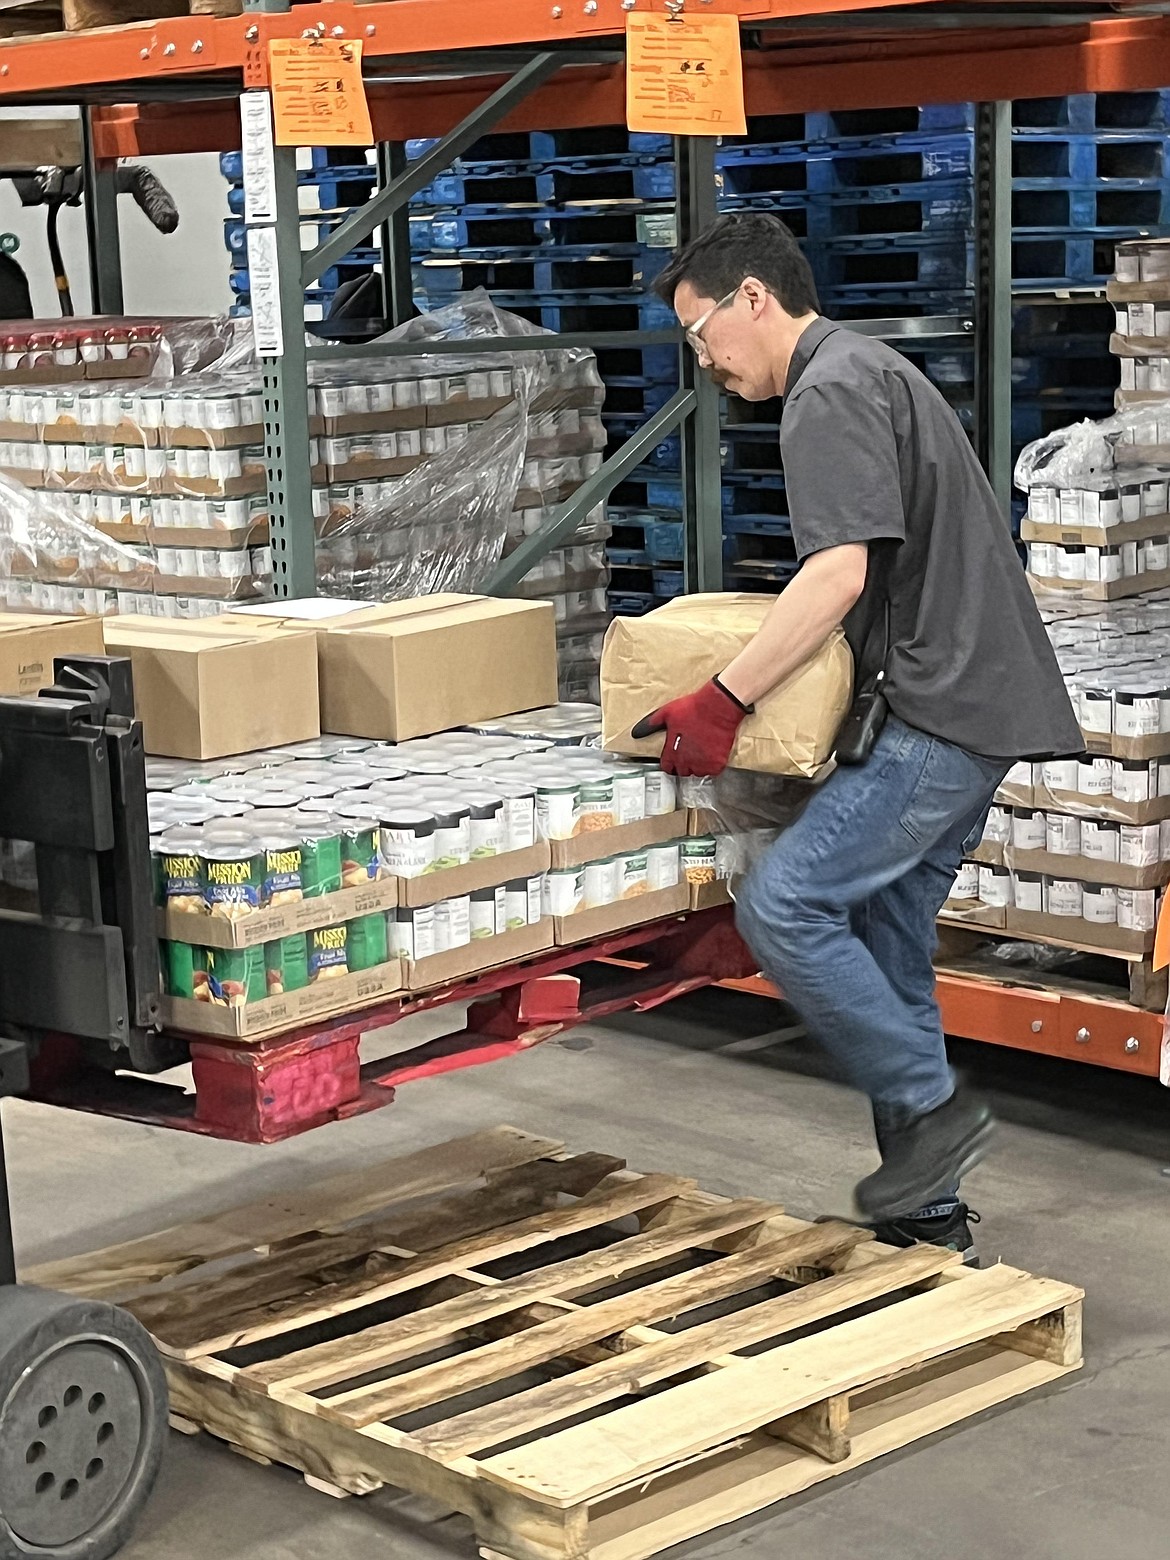 Brandon Vasquez on Friday moves inventory for the emergency food assistance program at Second Harvest.